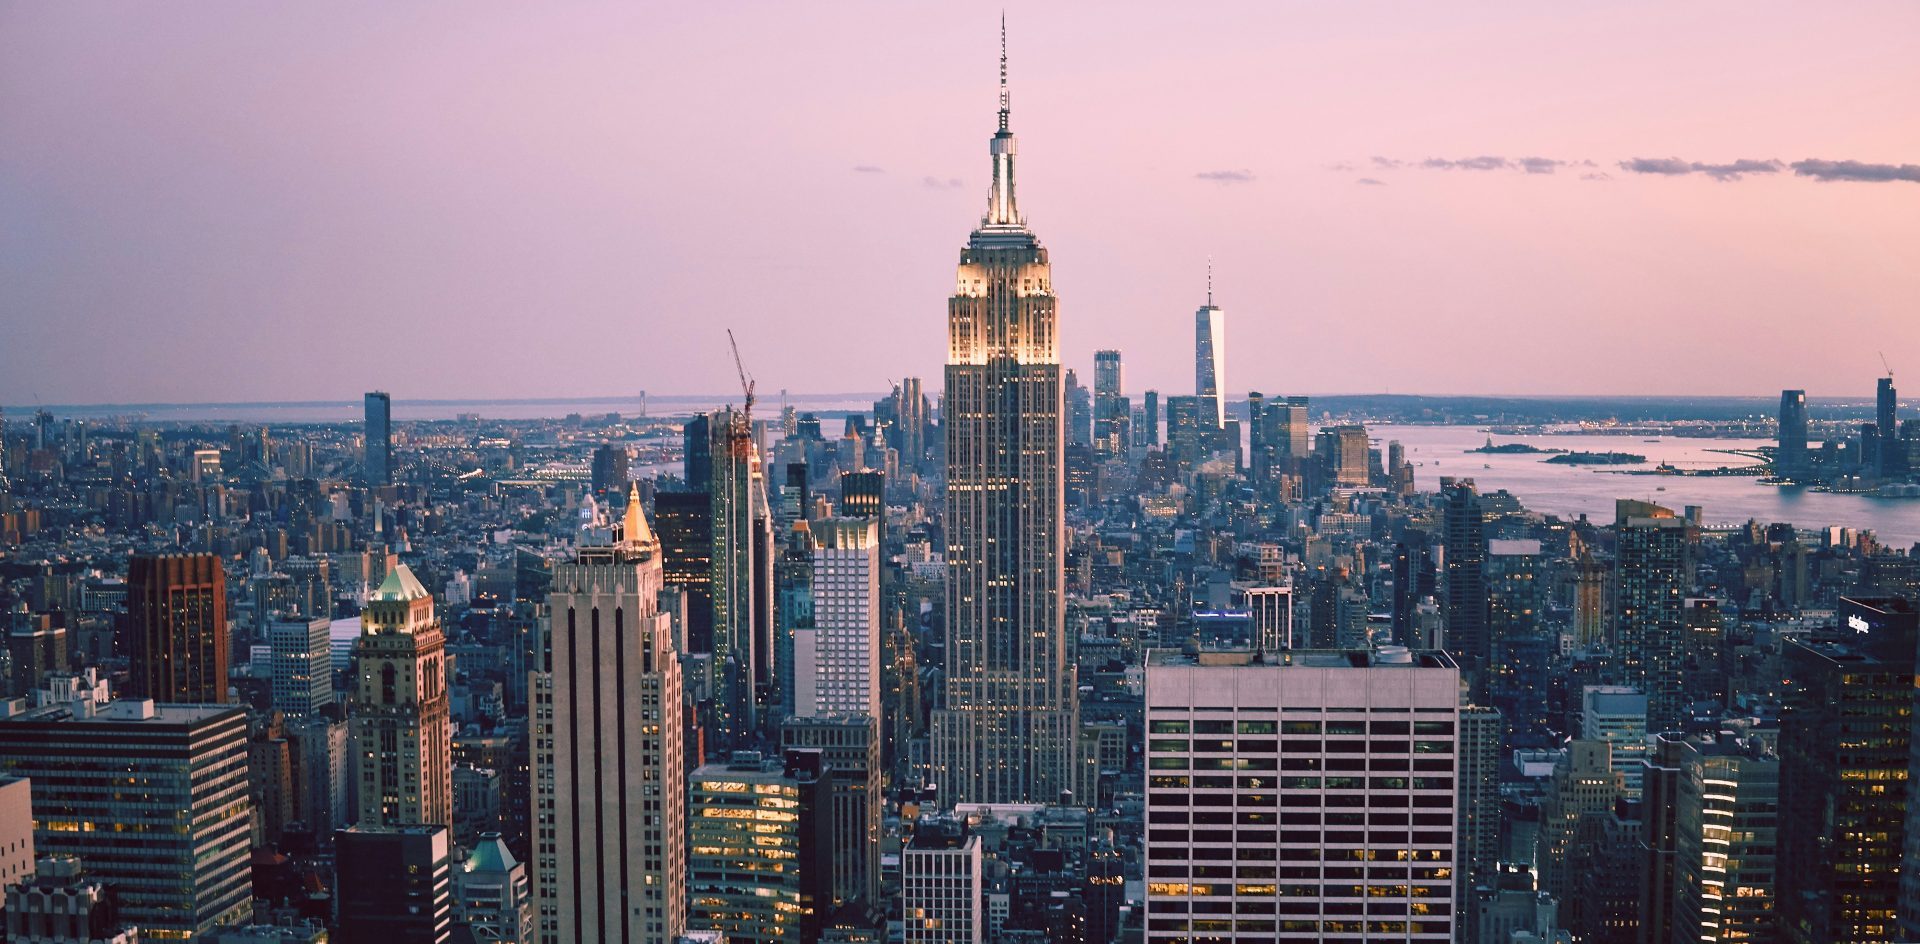 The skyline of New York City. Publishers gathered in New York City for INMA's Subscriptions Summit. Photo by Mark Boss from Unsplash